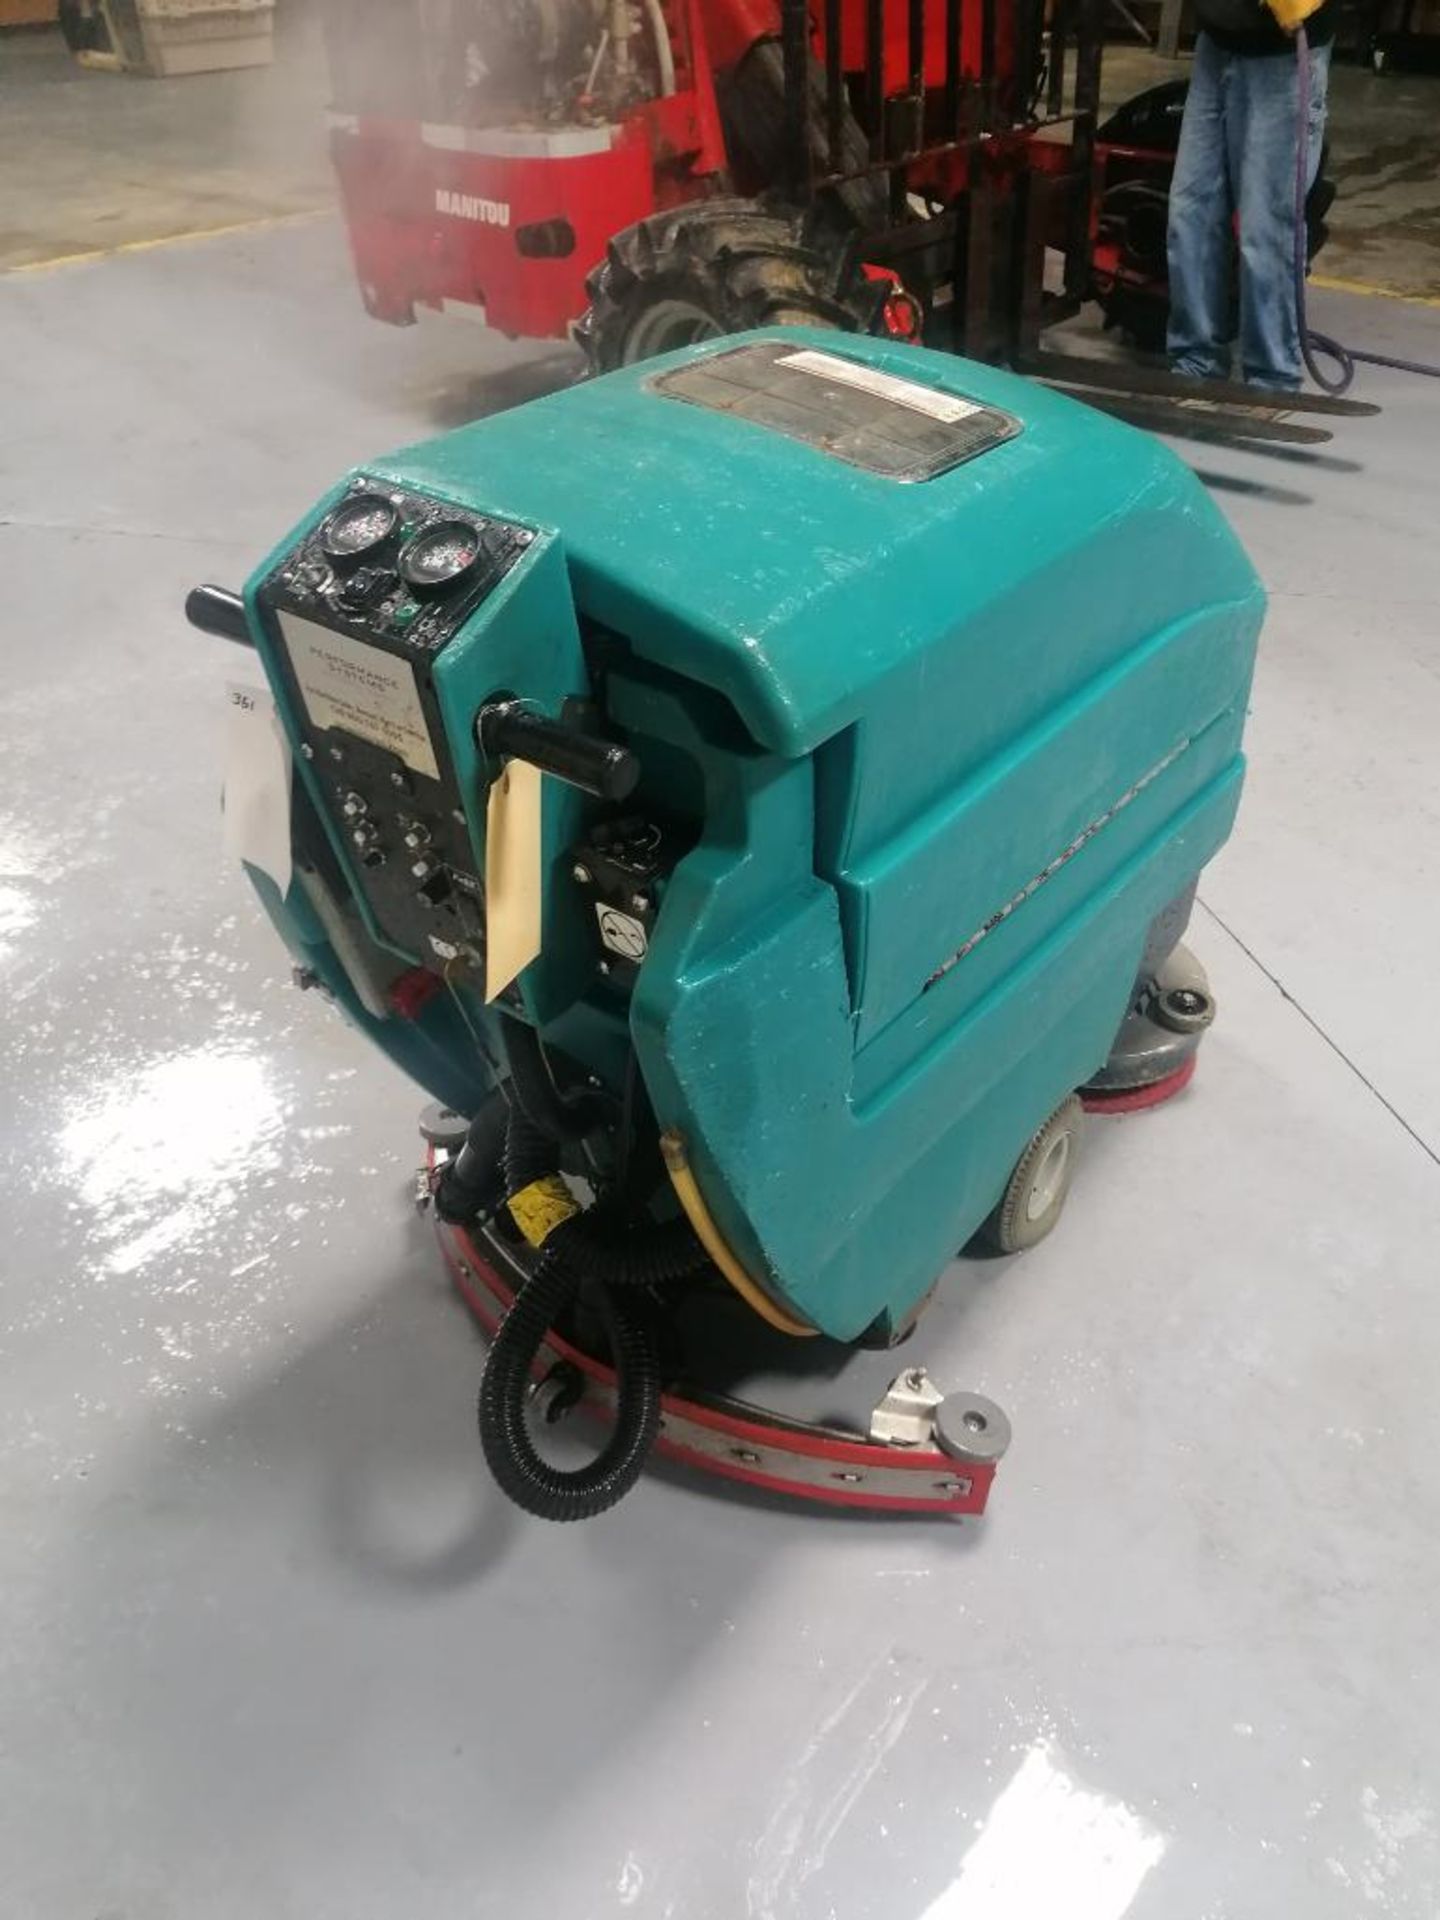 Tennant 5400 Floor Scrubber, Serial #540010229139 24 V, 21 Hours. Located in Mt. Pleasant, IA. - Image 11 of 19